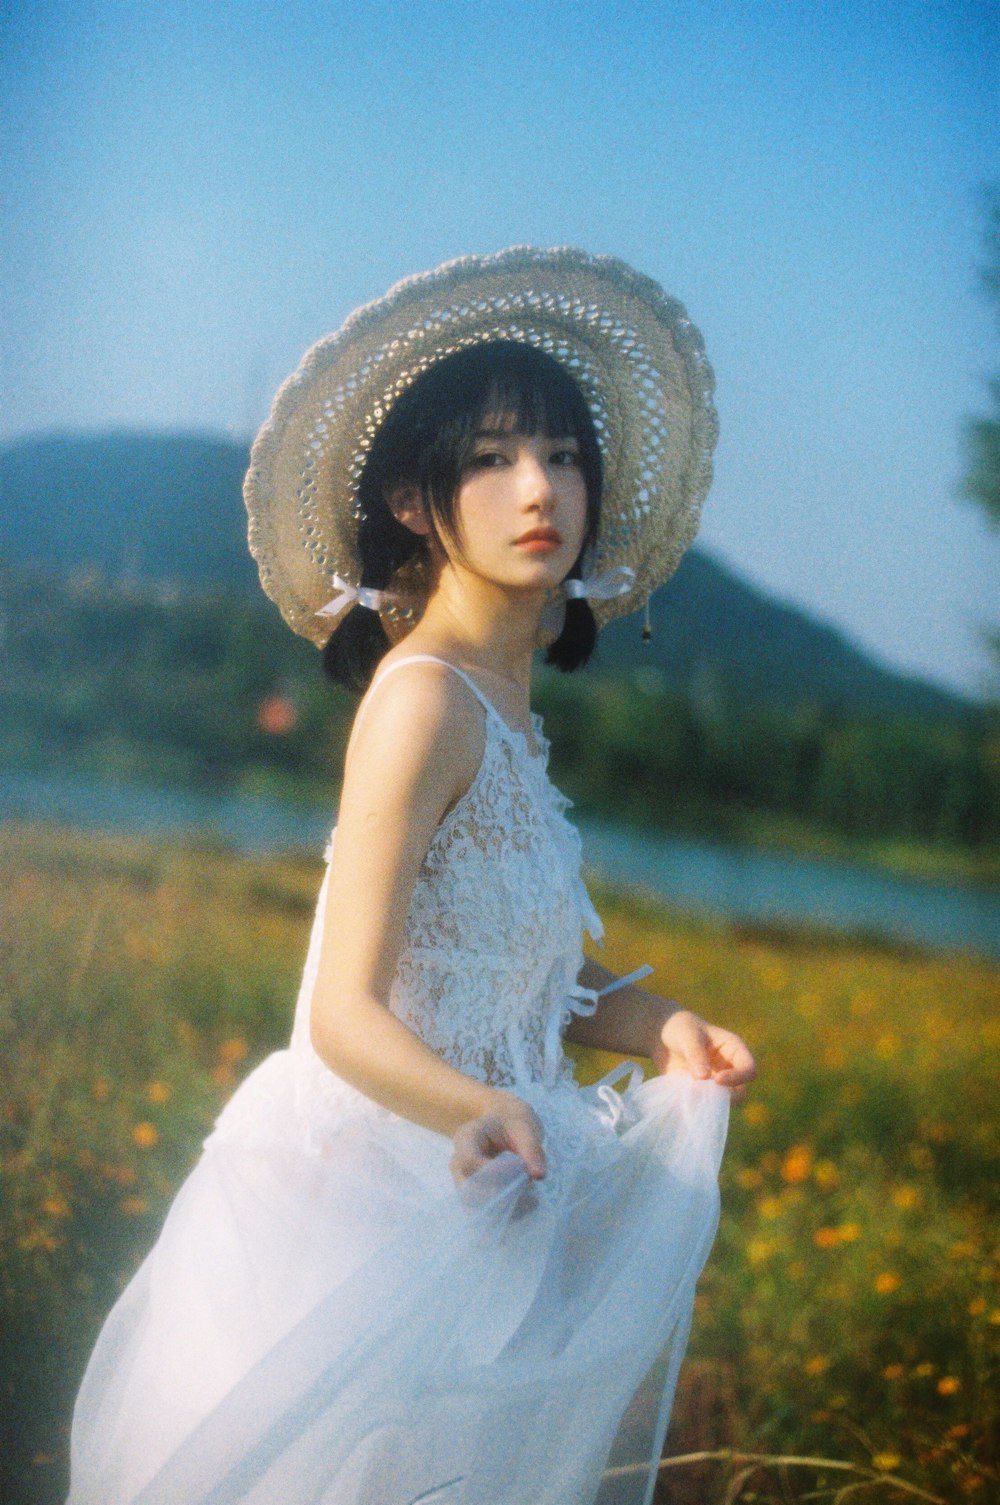 woman in white sleeveless dress wearing white sun hat standing on green grass field during daytime